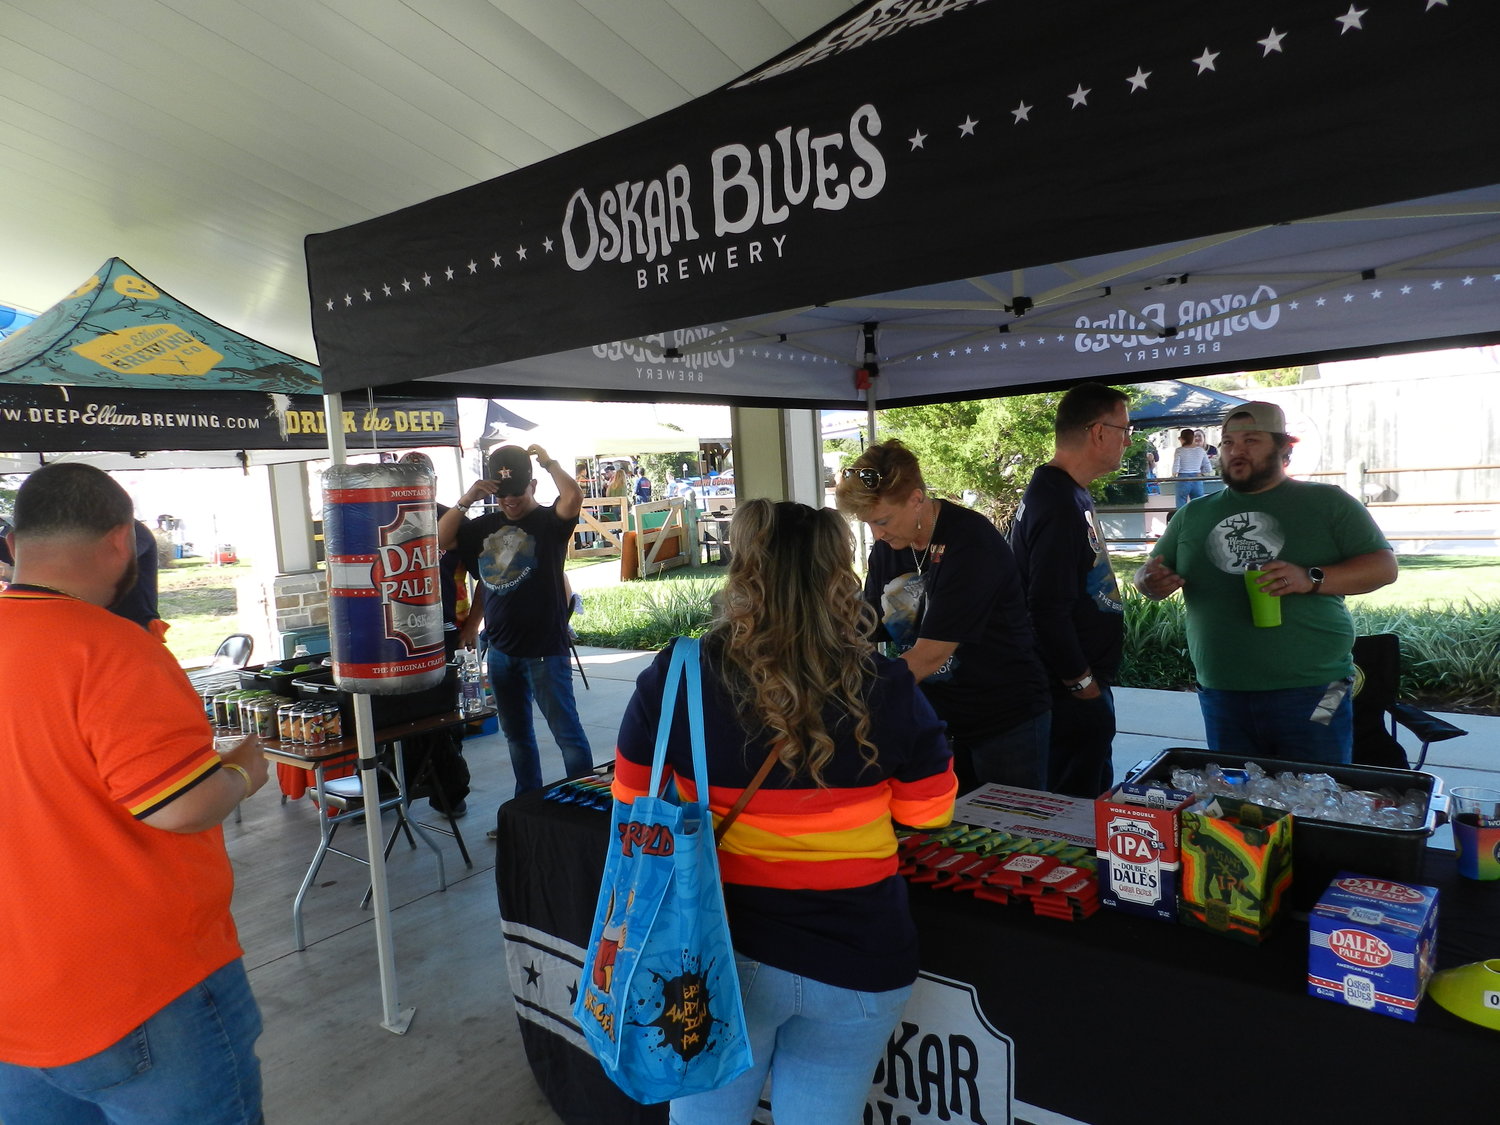 Oskar Blues Brewery was among the breweries with a booth at a past Wild West Brew Fest.